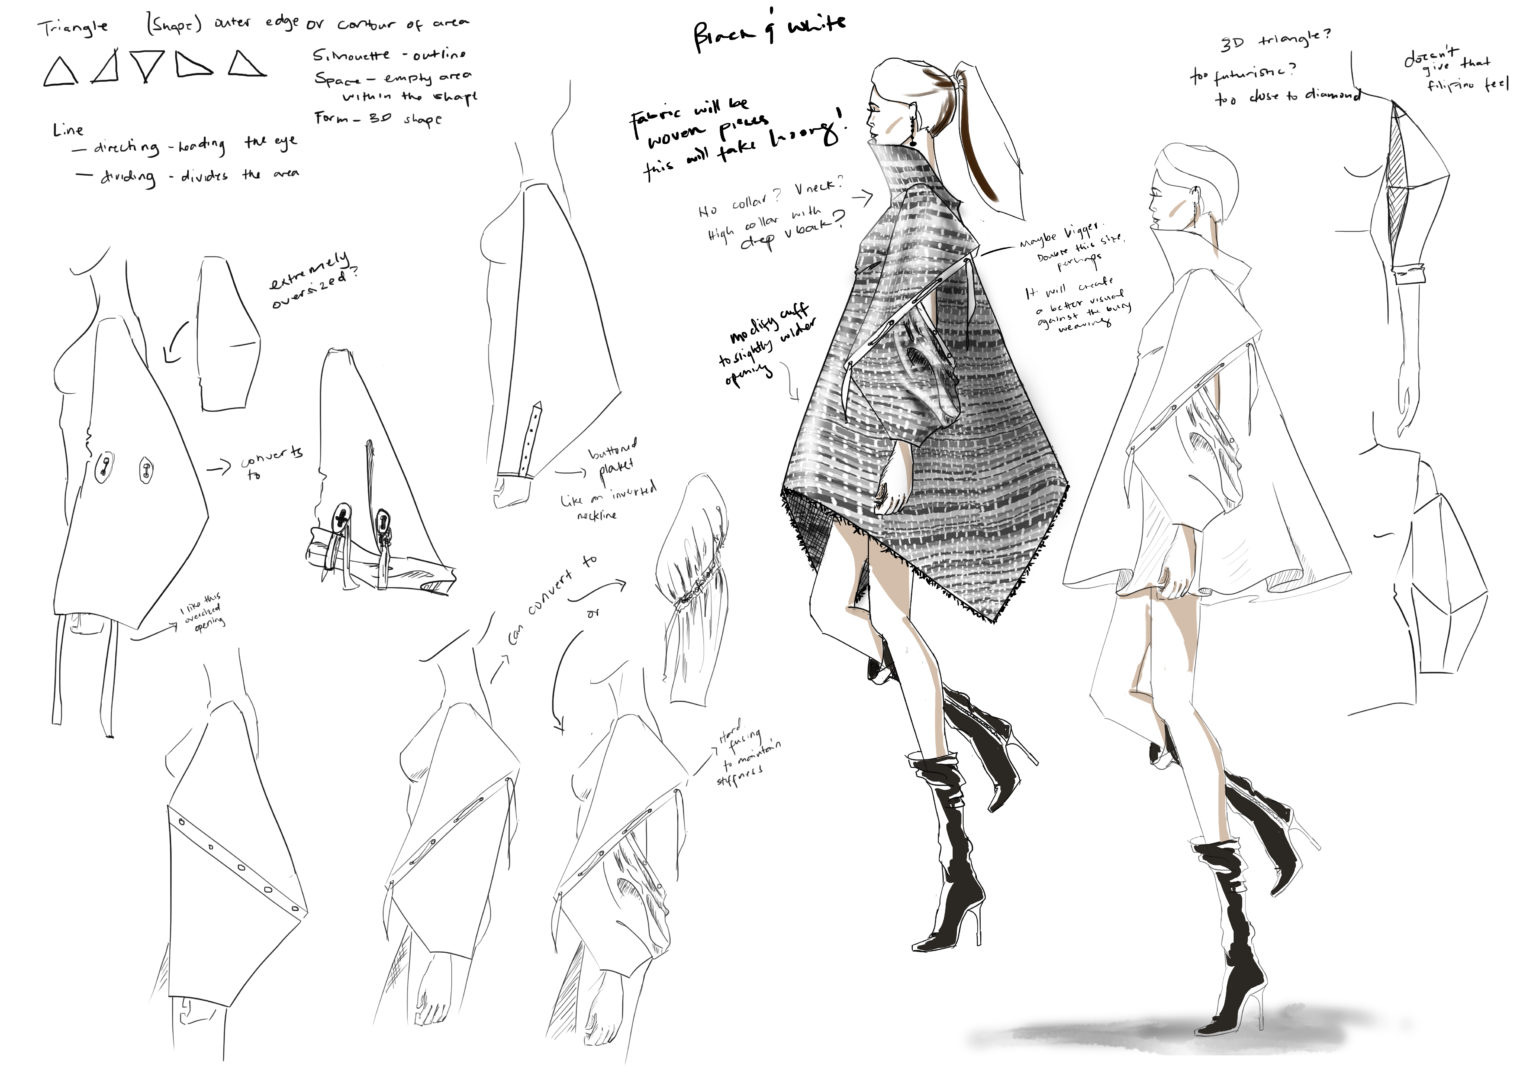 Draft 4. Exploring triangle shape through volume and detailed sleeves